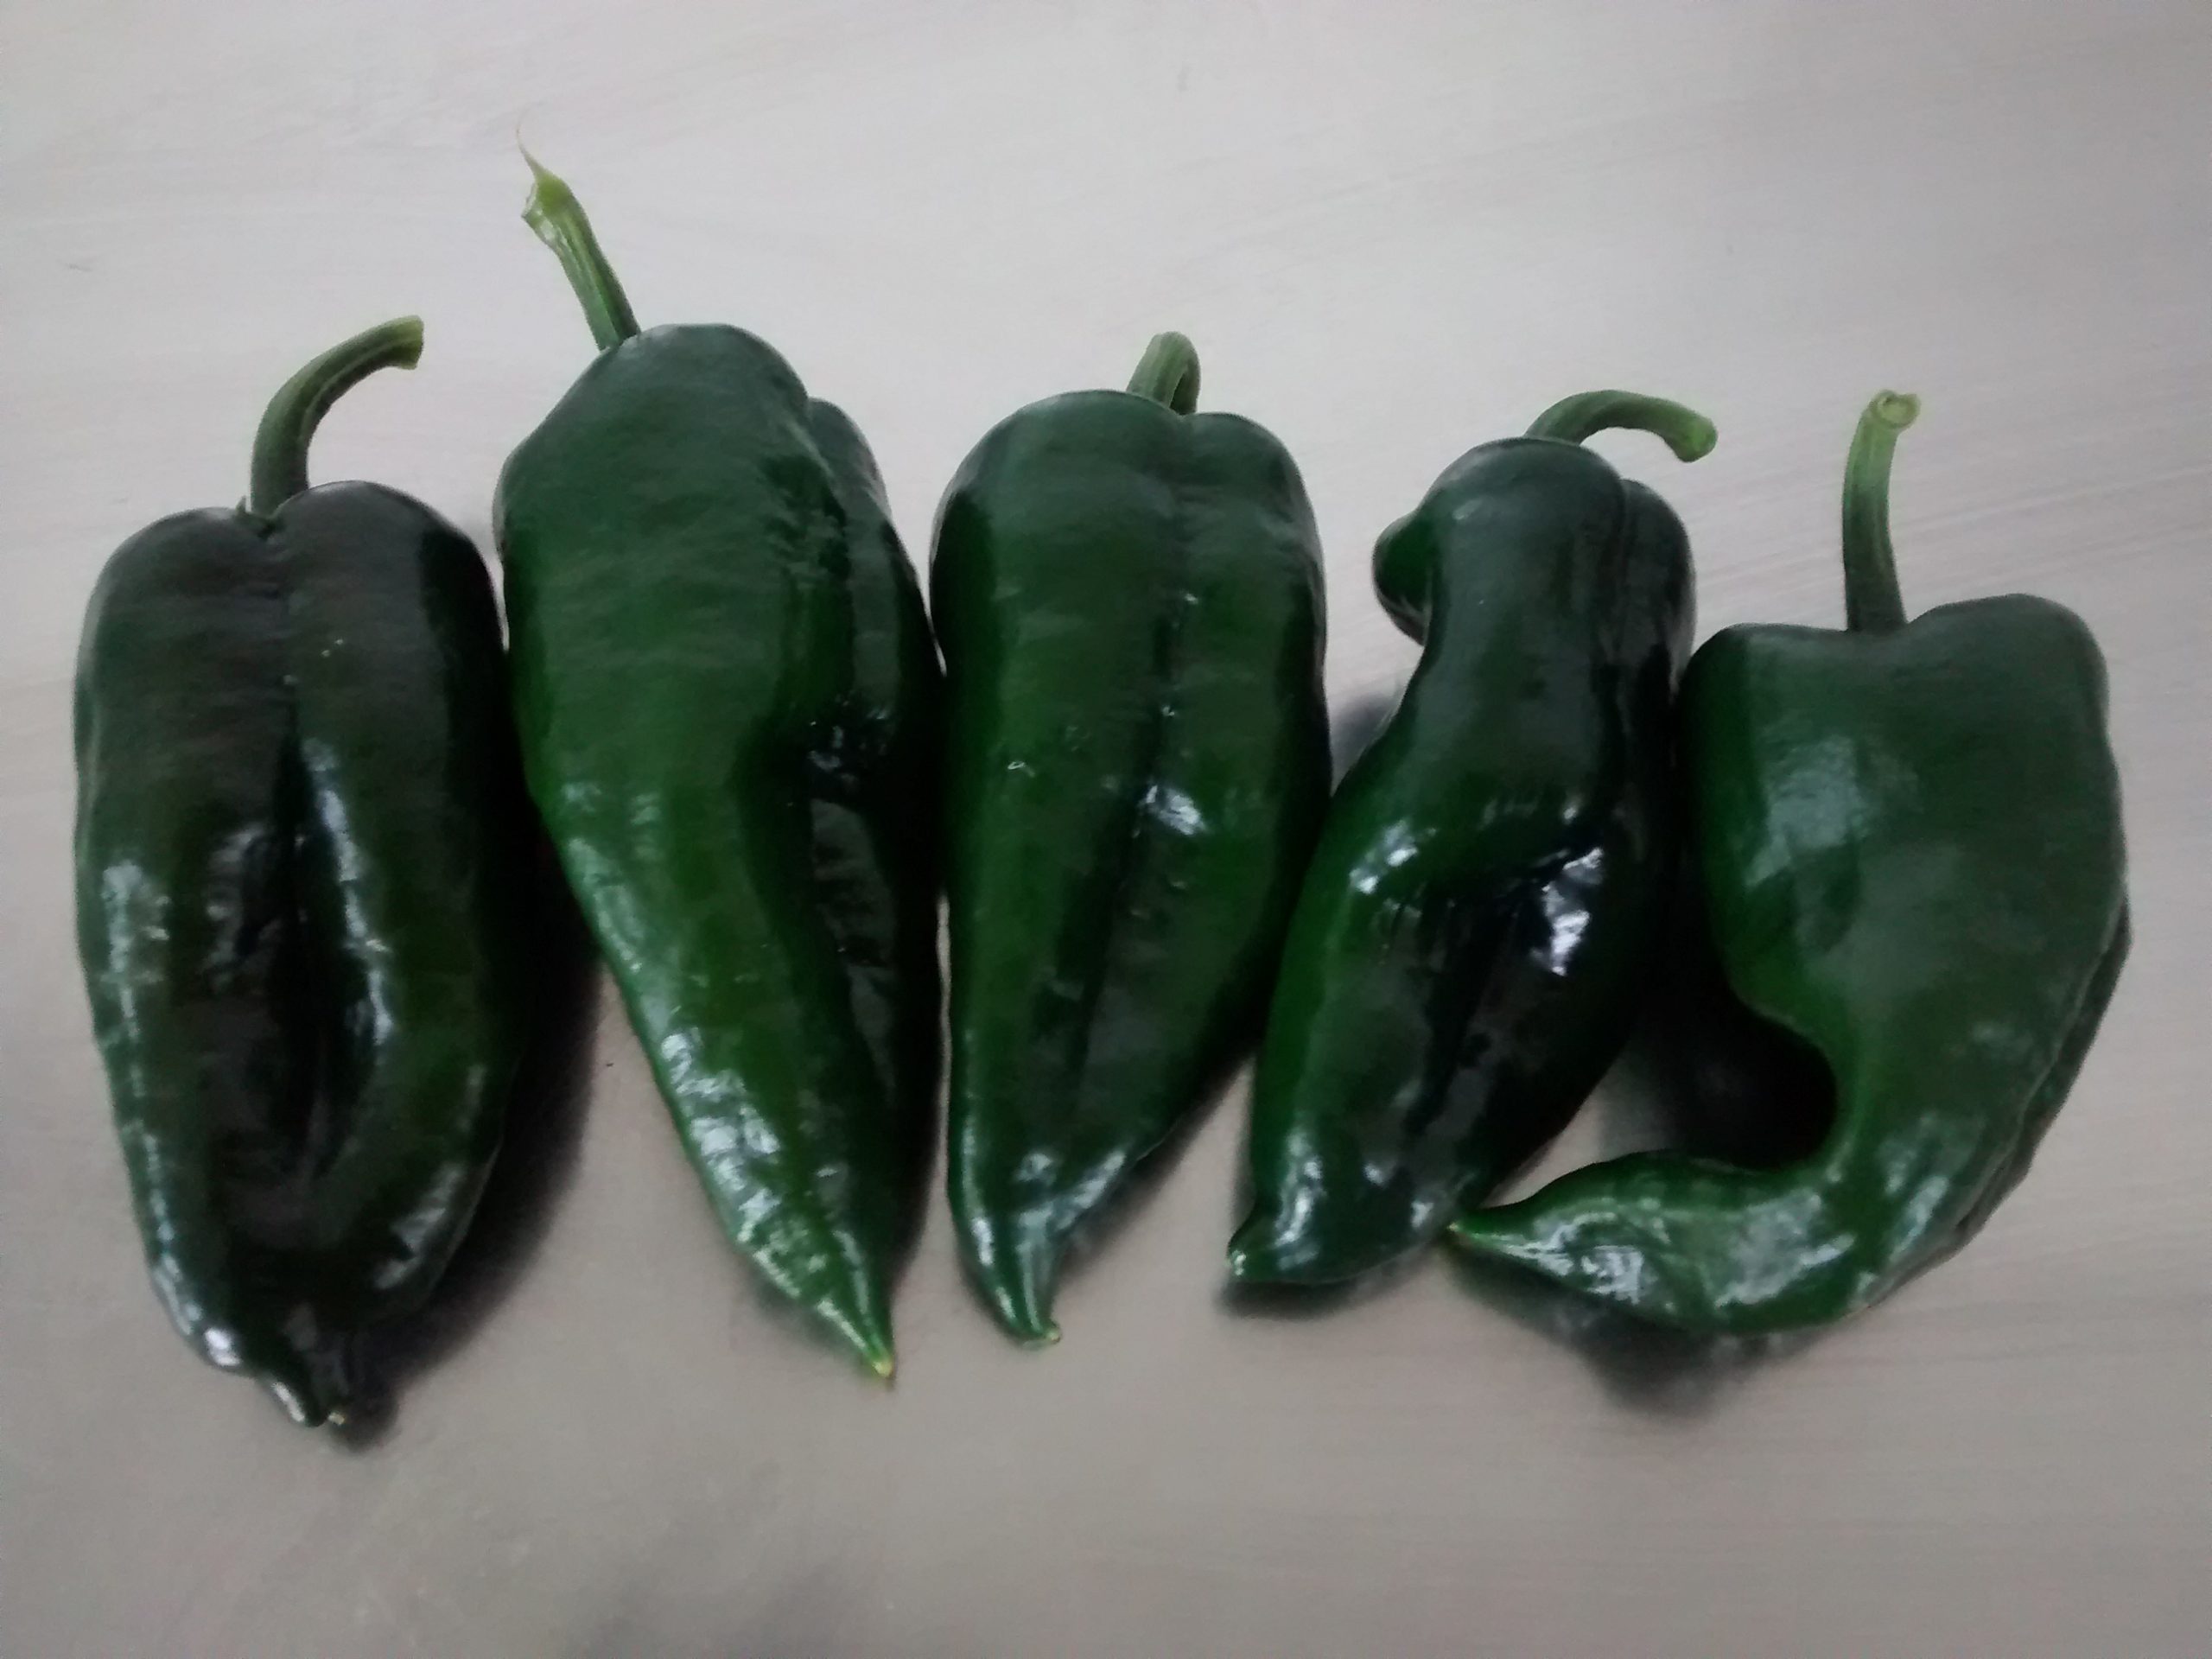 Picture of fresh Poblano chilli peppers.